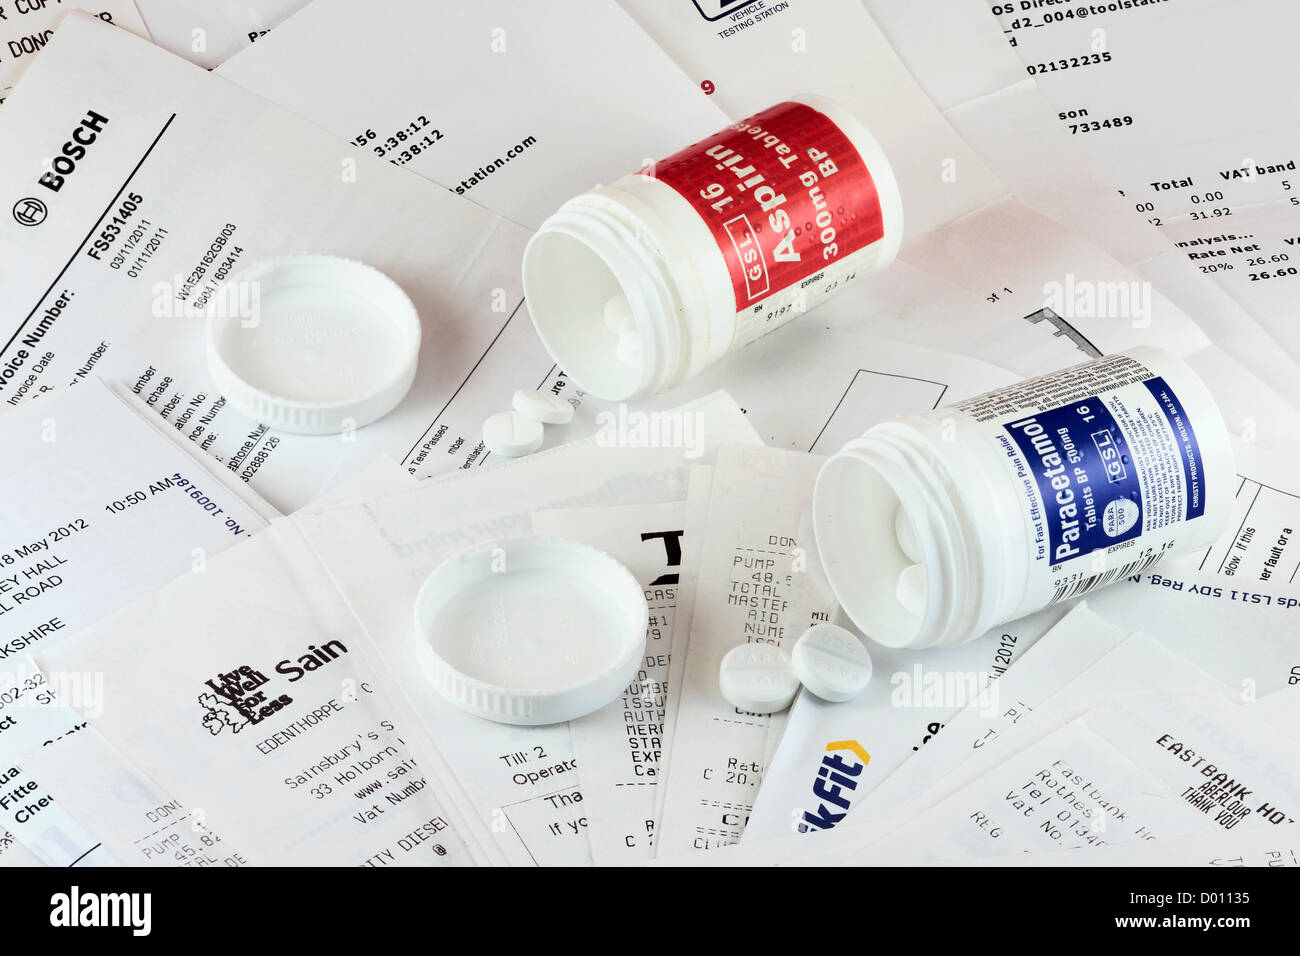 Receipts, Invoices and Painkillers Stock Photo